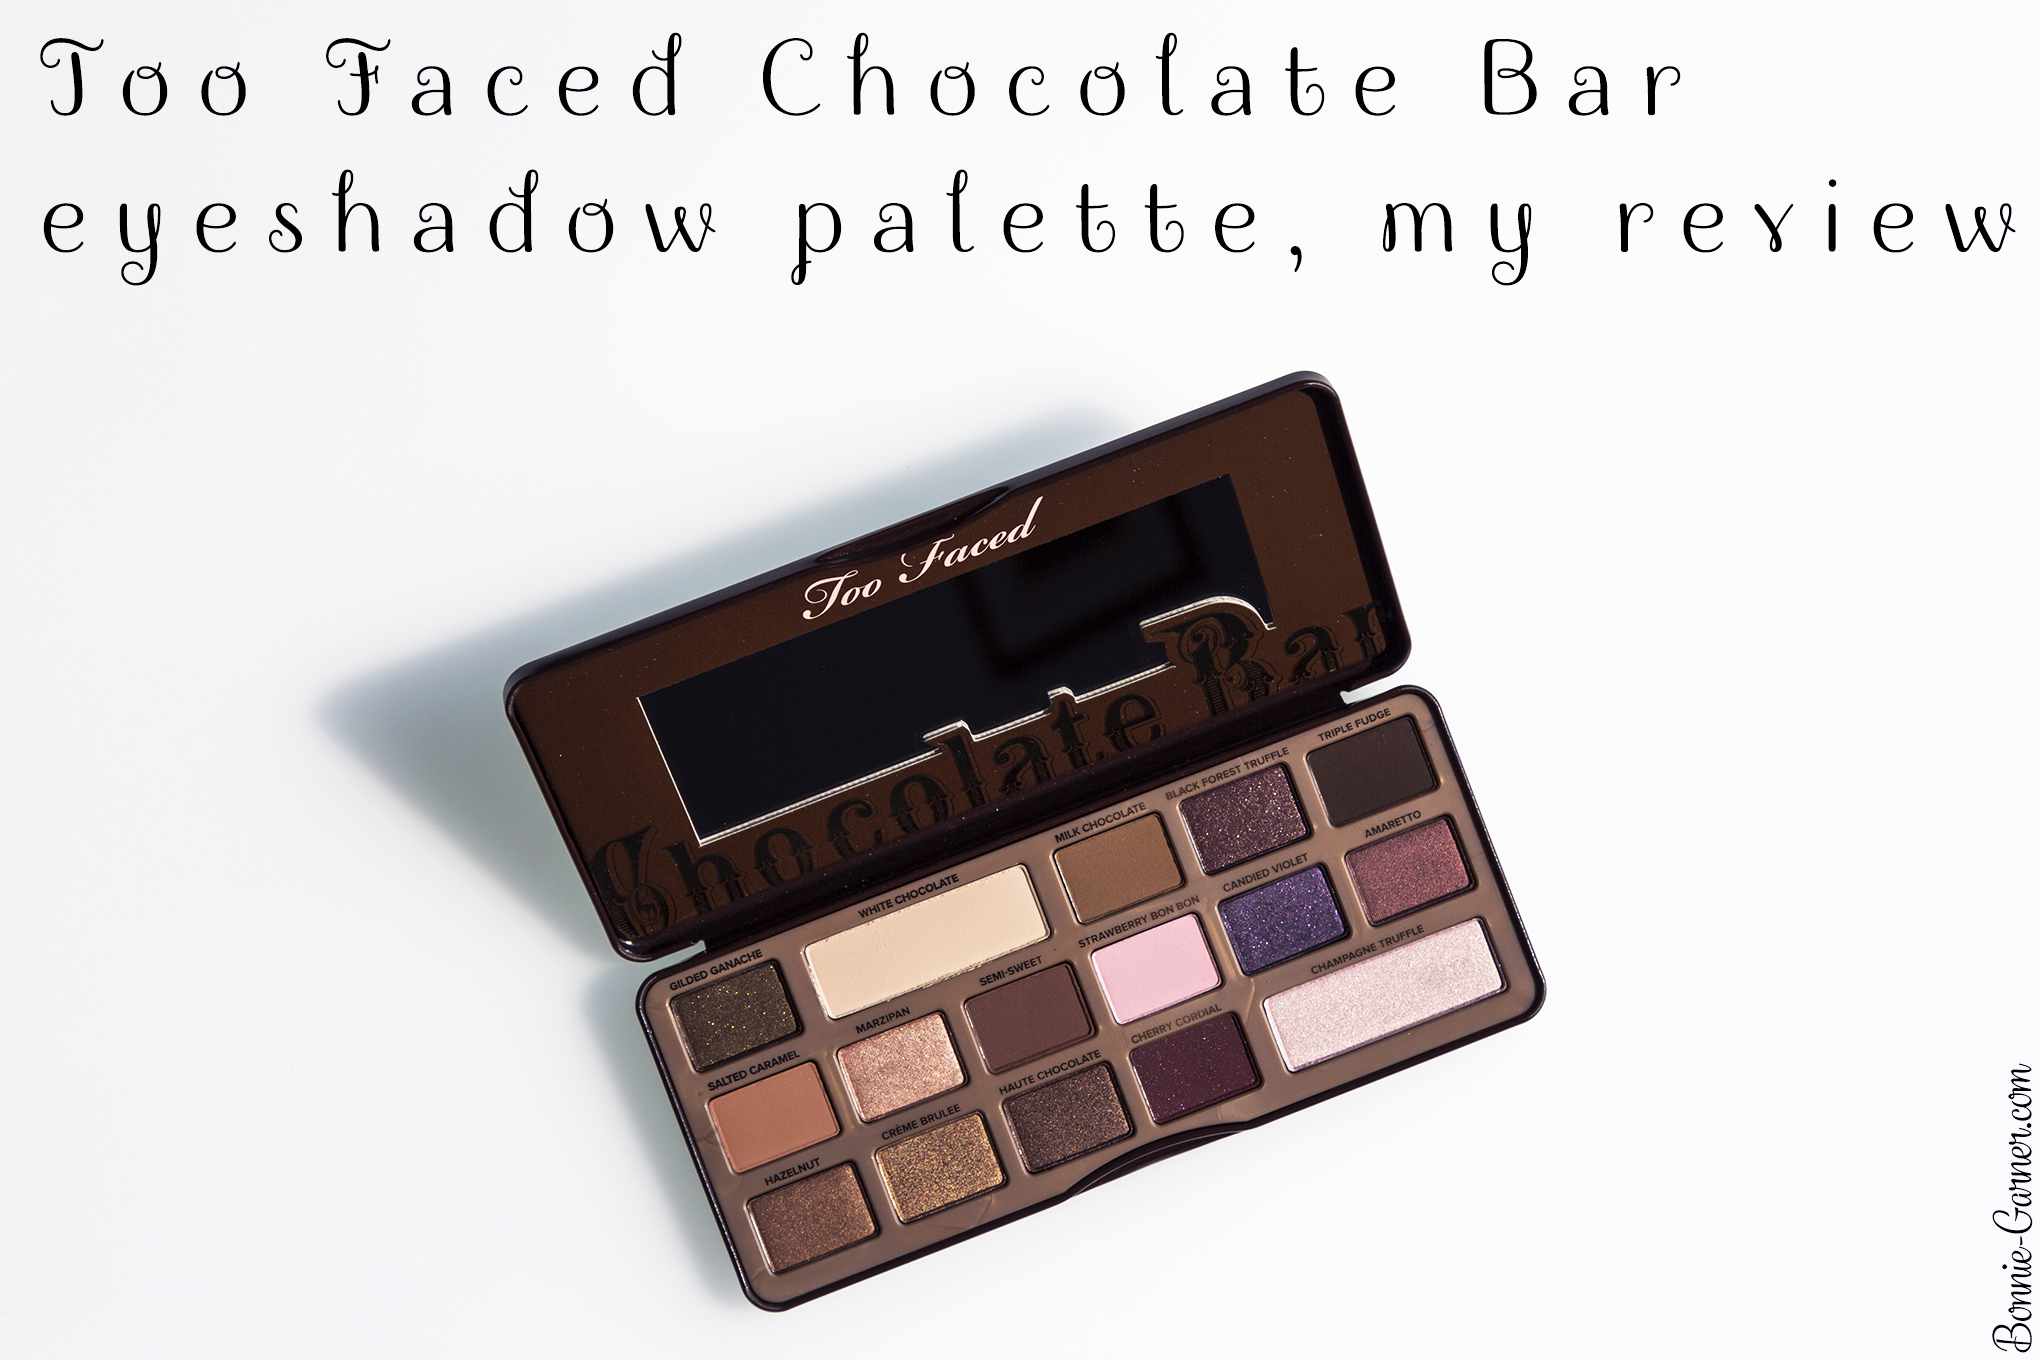 Too Faced Chocolate Bar eyeshadow palette, my review